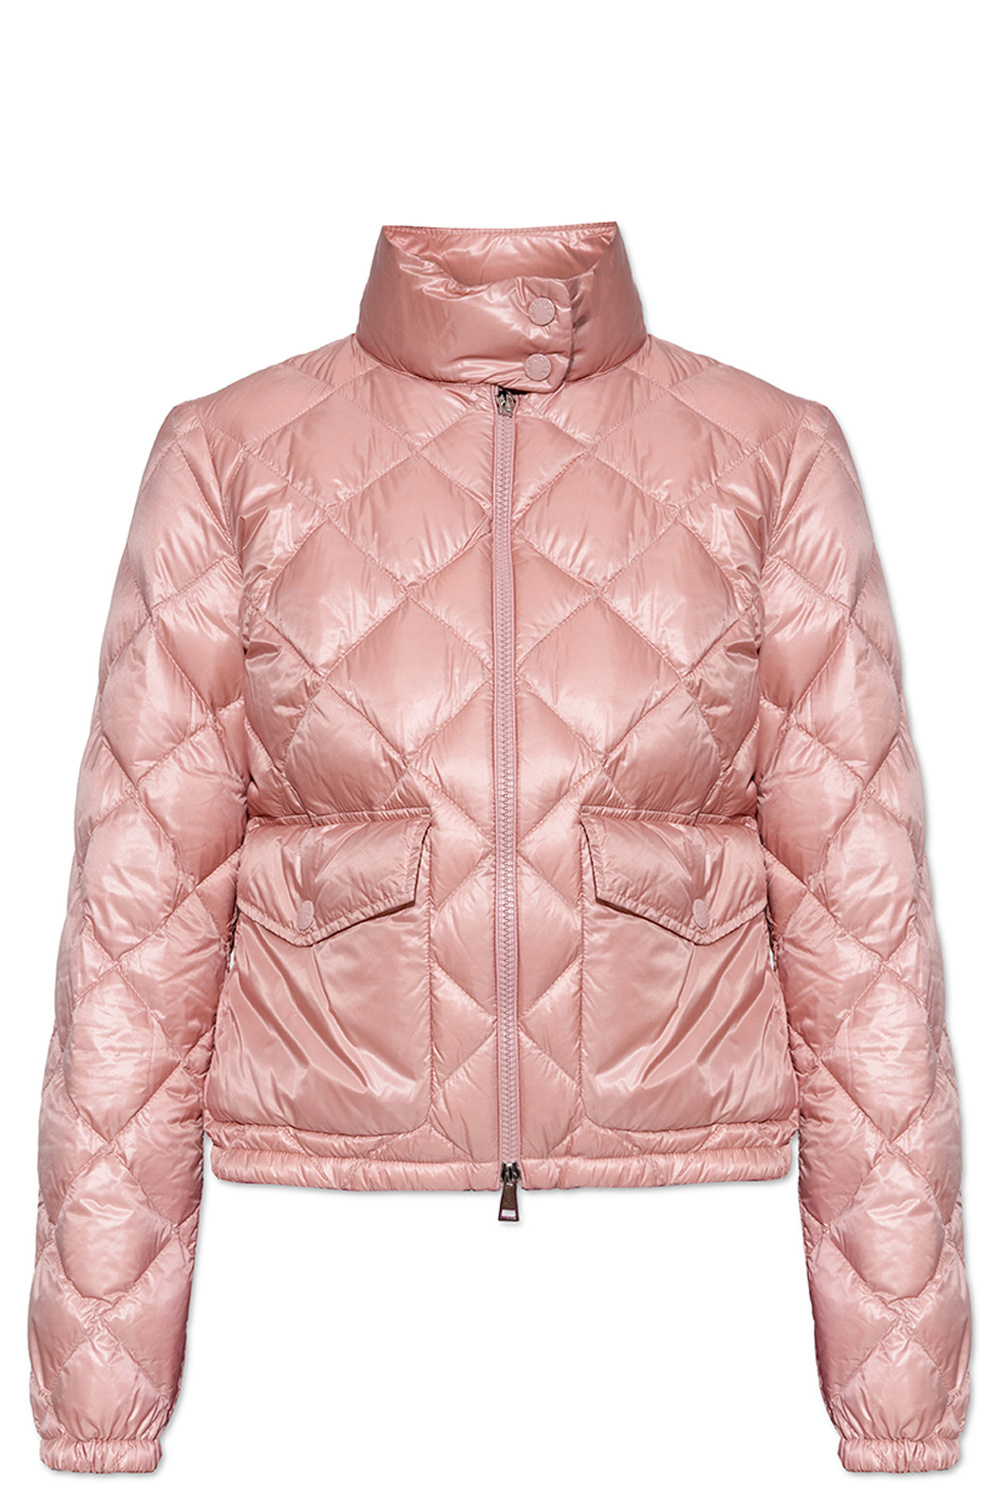 Louis Vuitton Grey Synthetic Quilted Patch Ski Down Jacket M Louis Vuitton